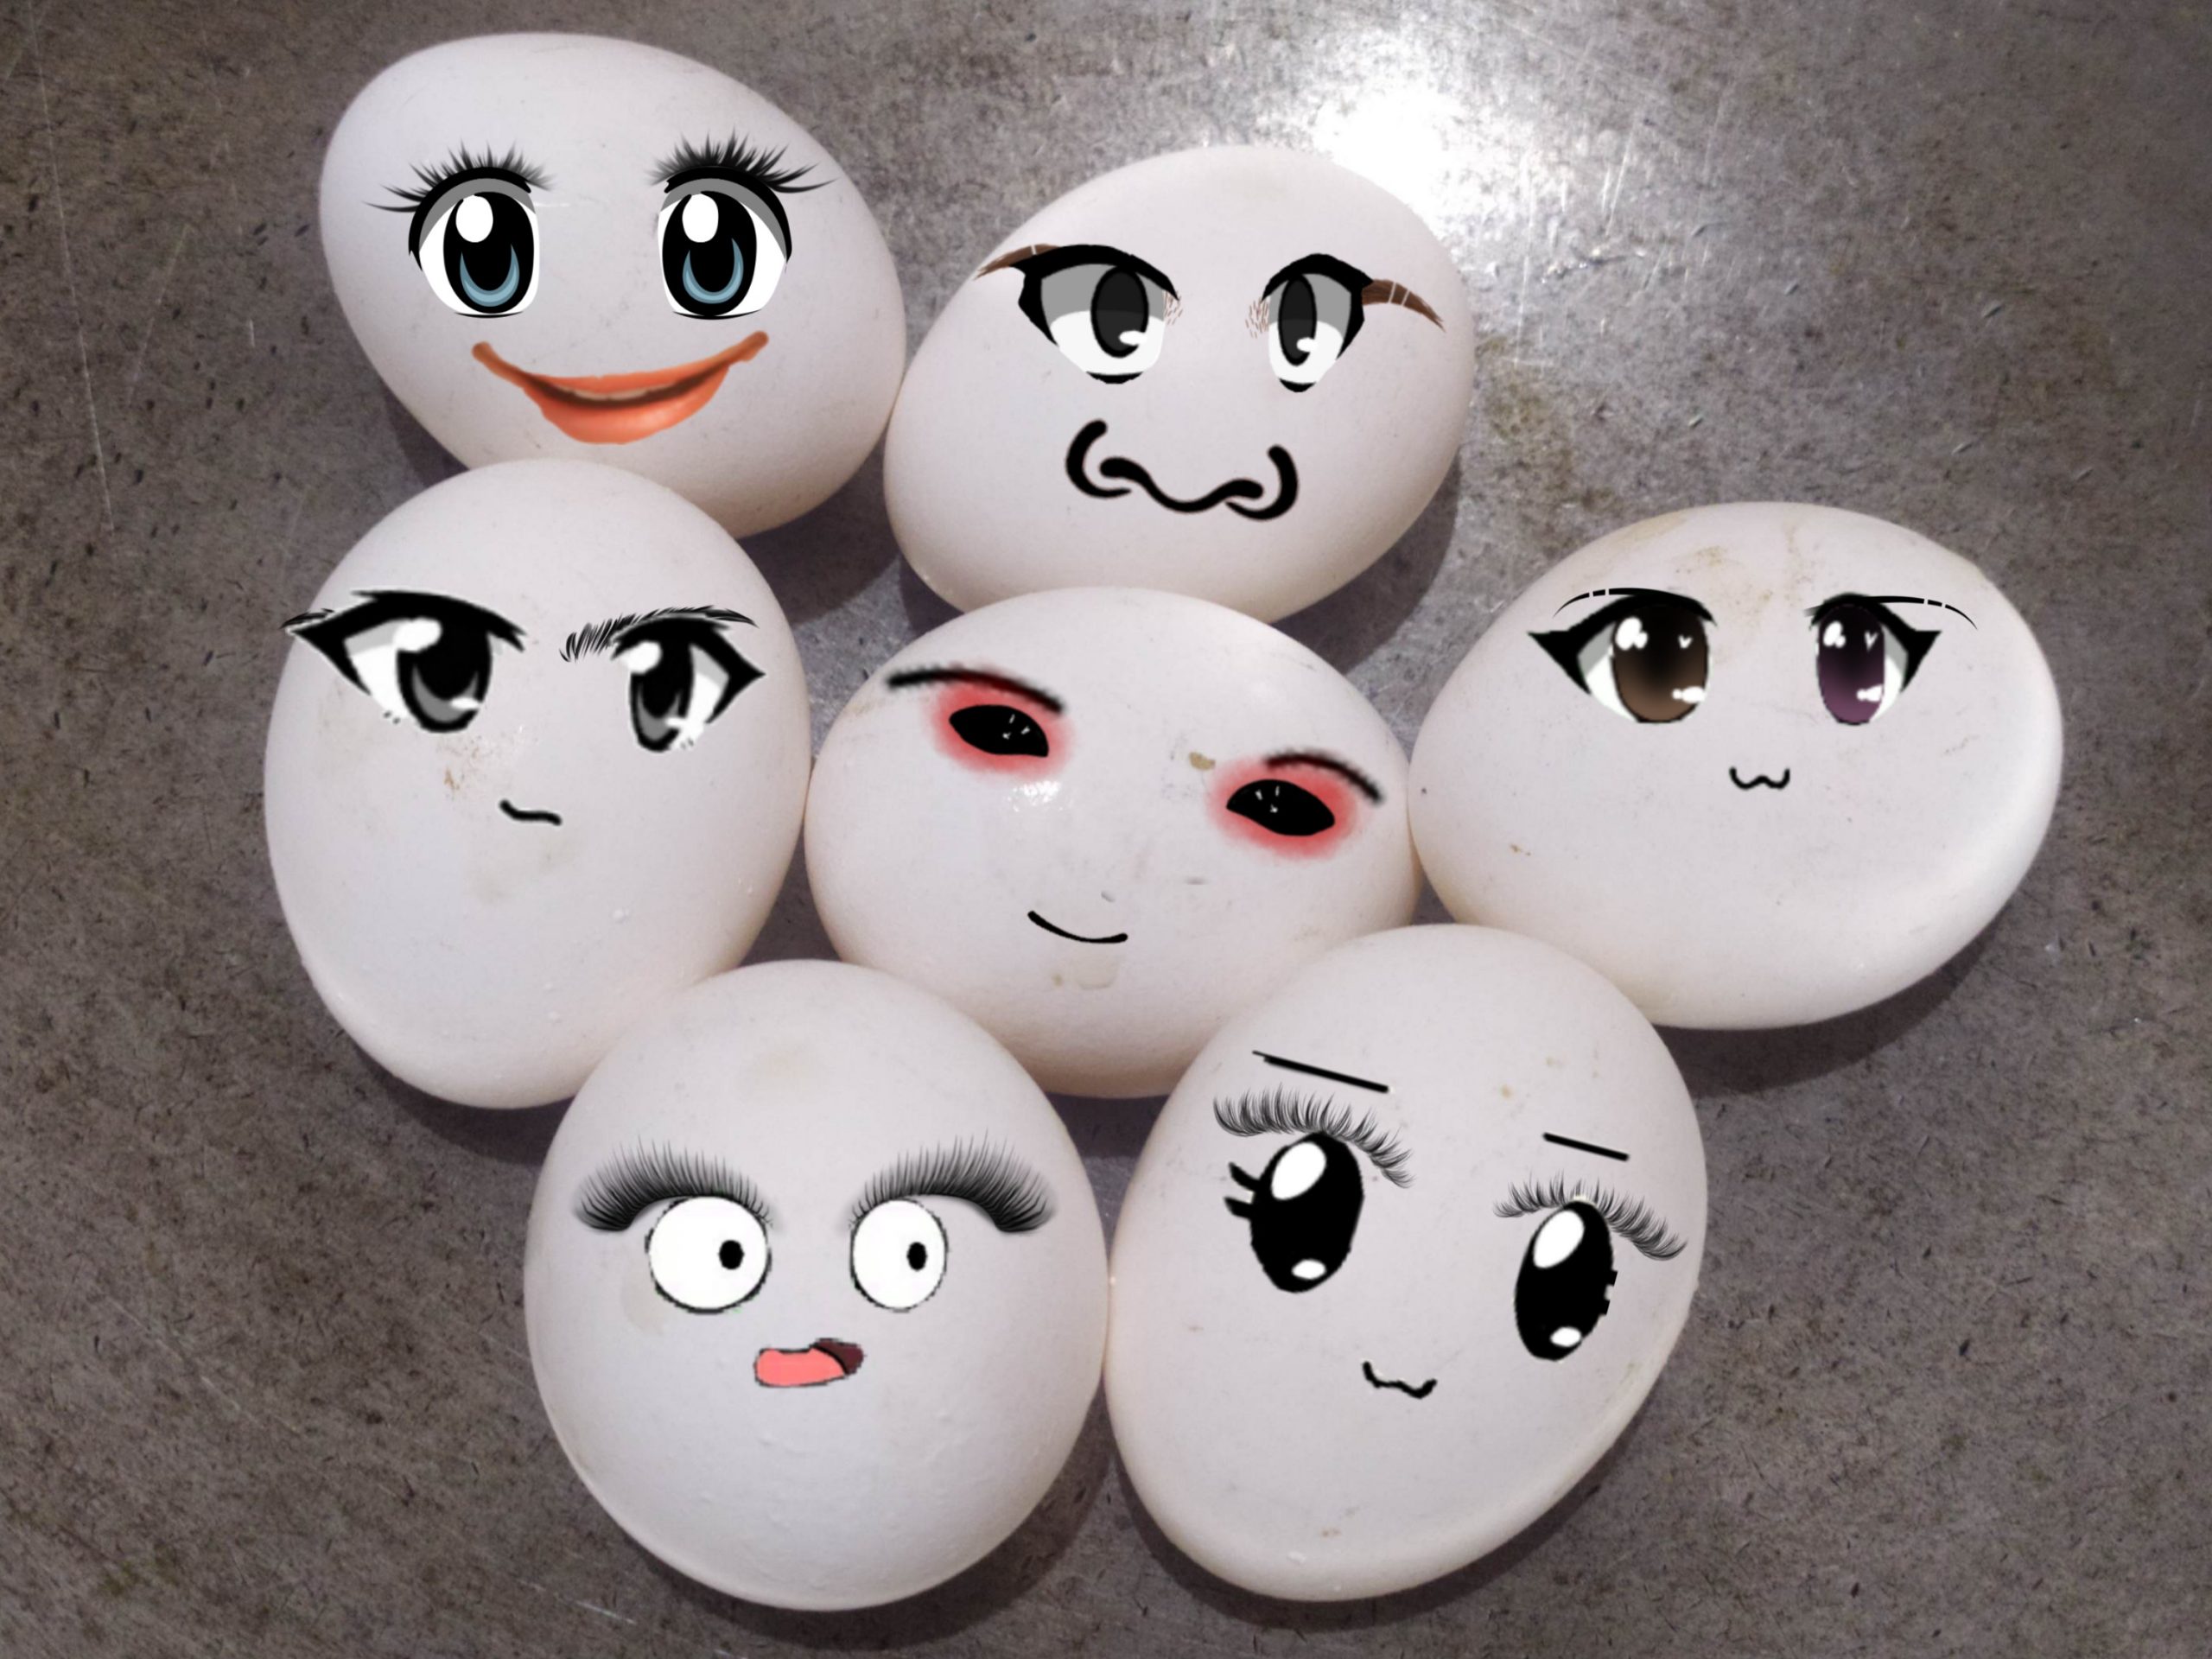 Facial expressions made on eggs